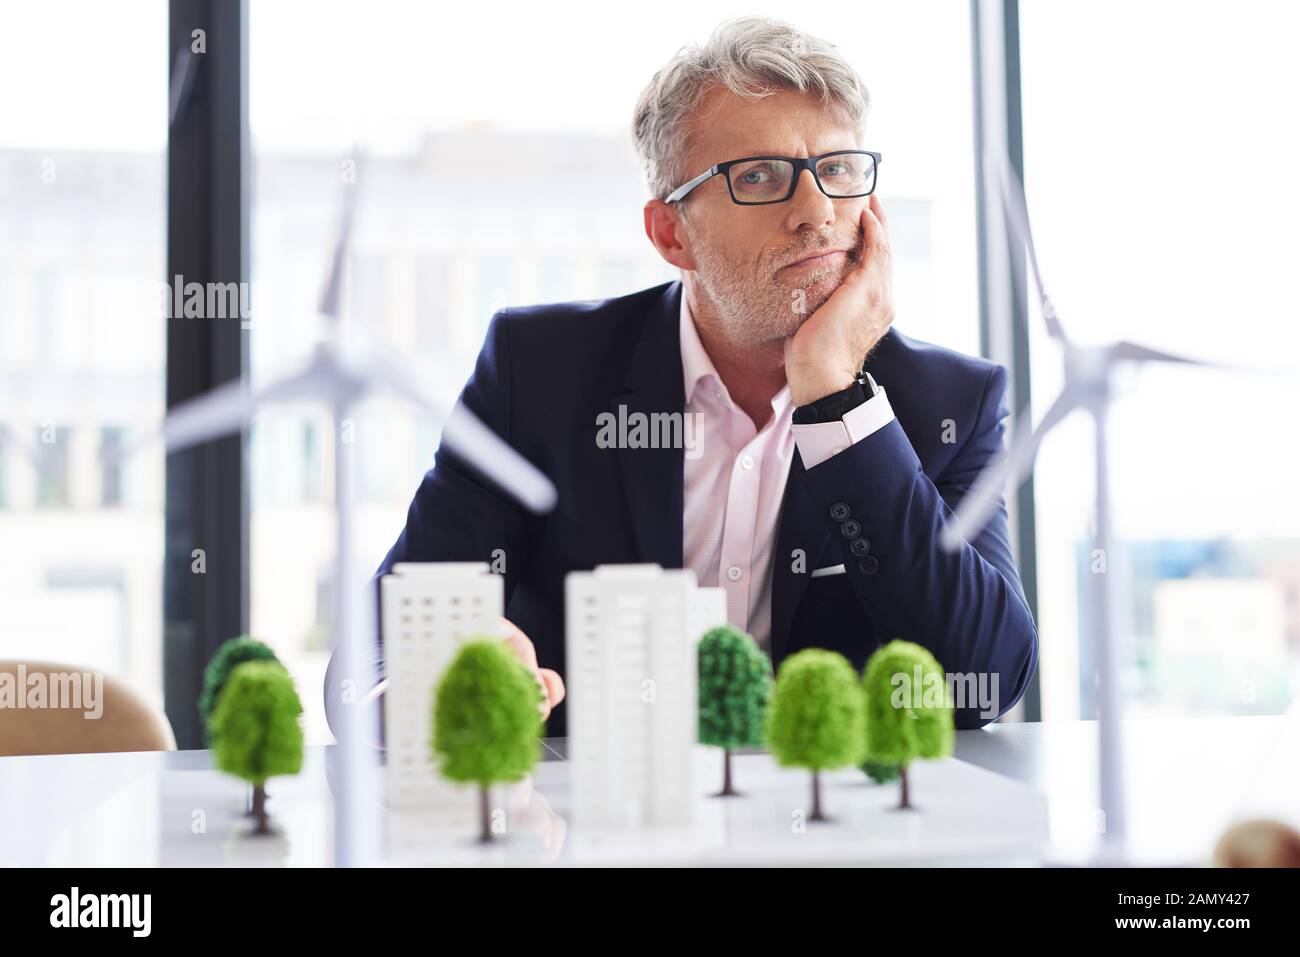 Portrait of tired businessman at work Stock Photo